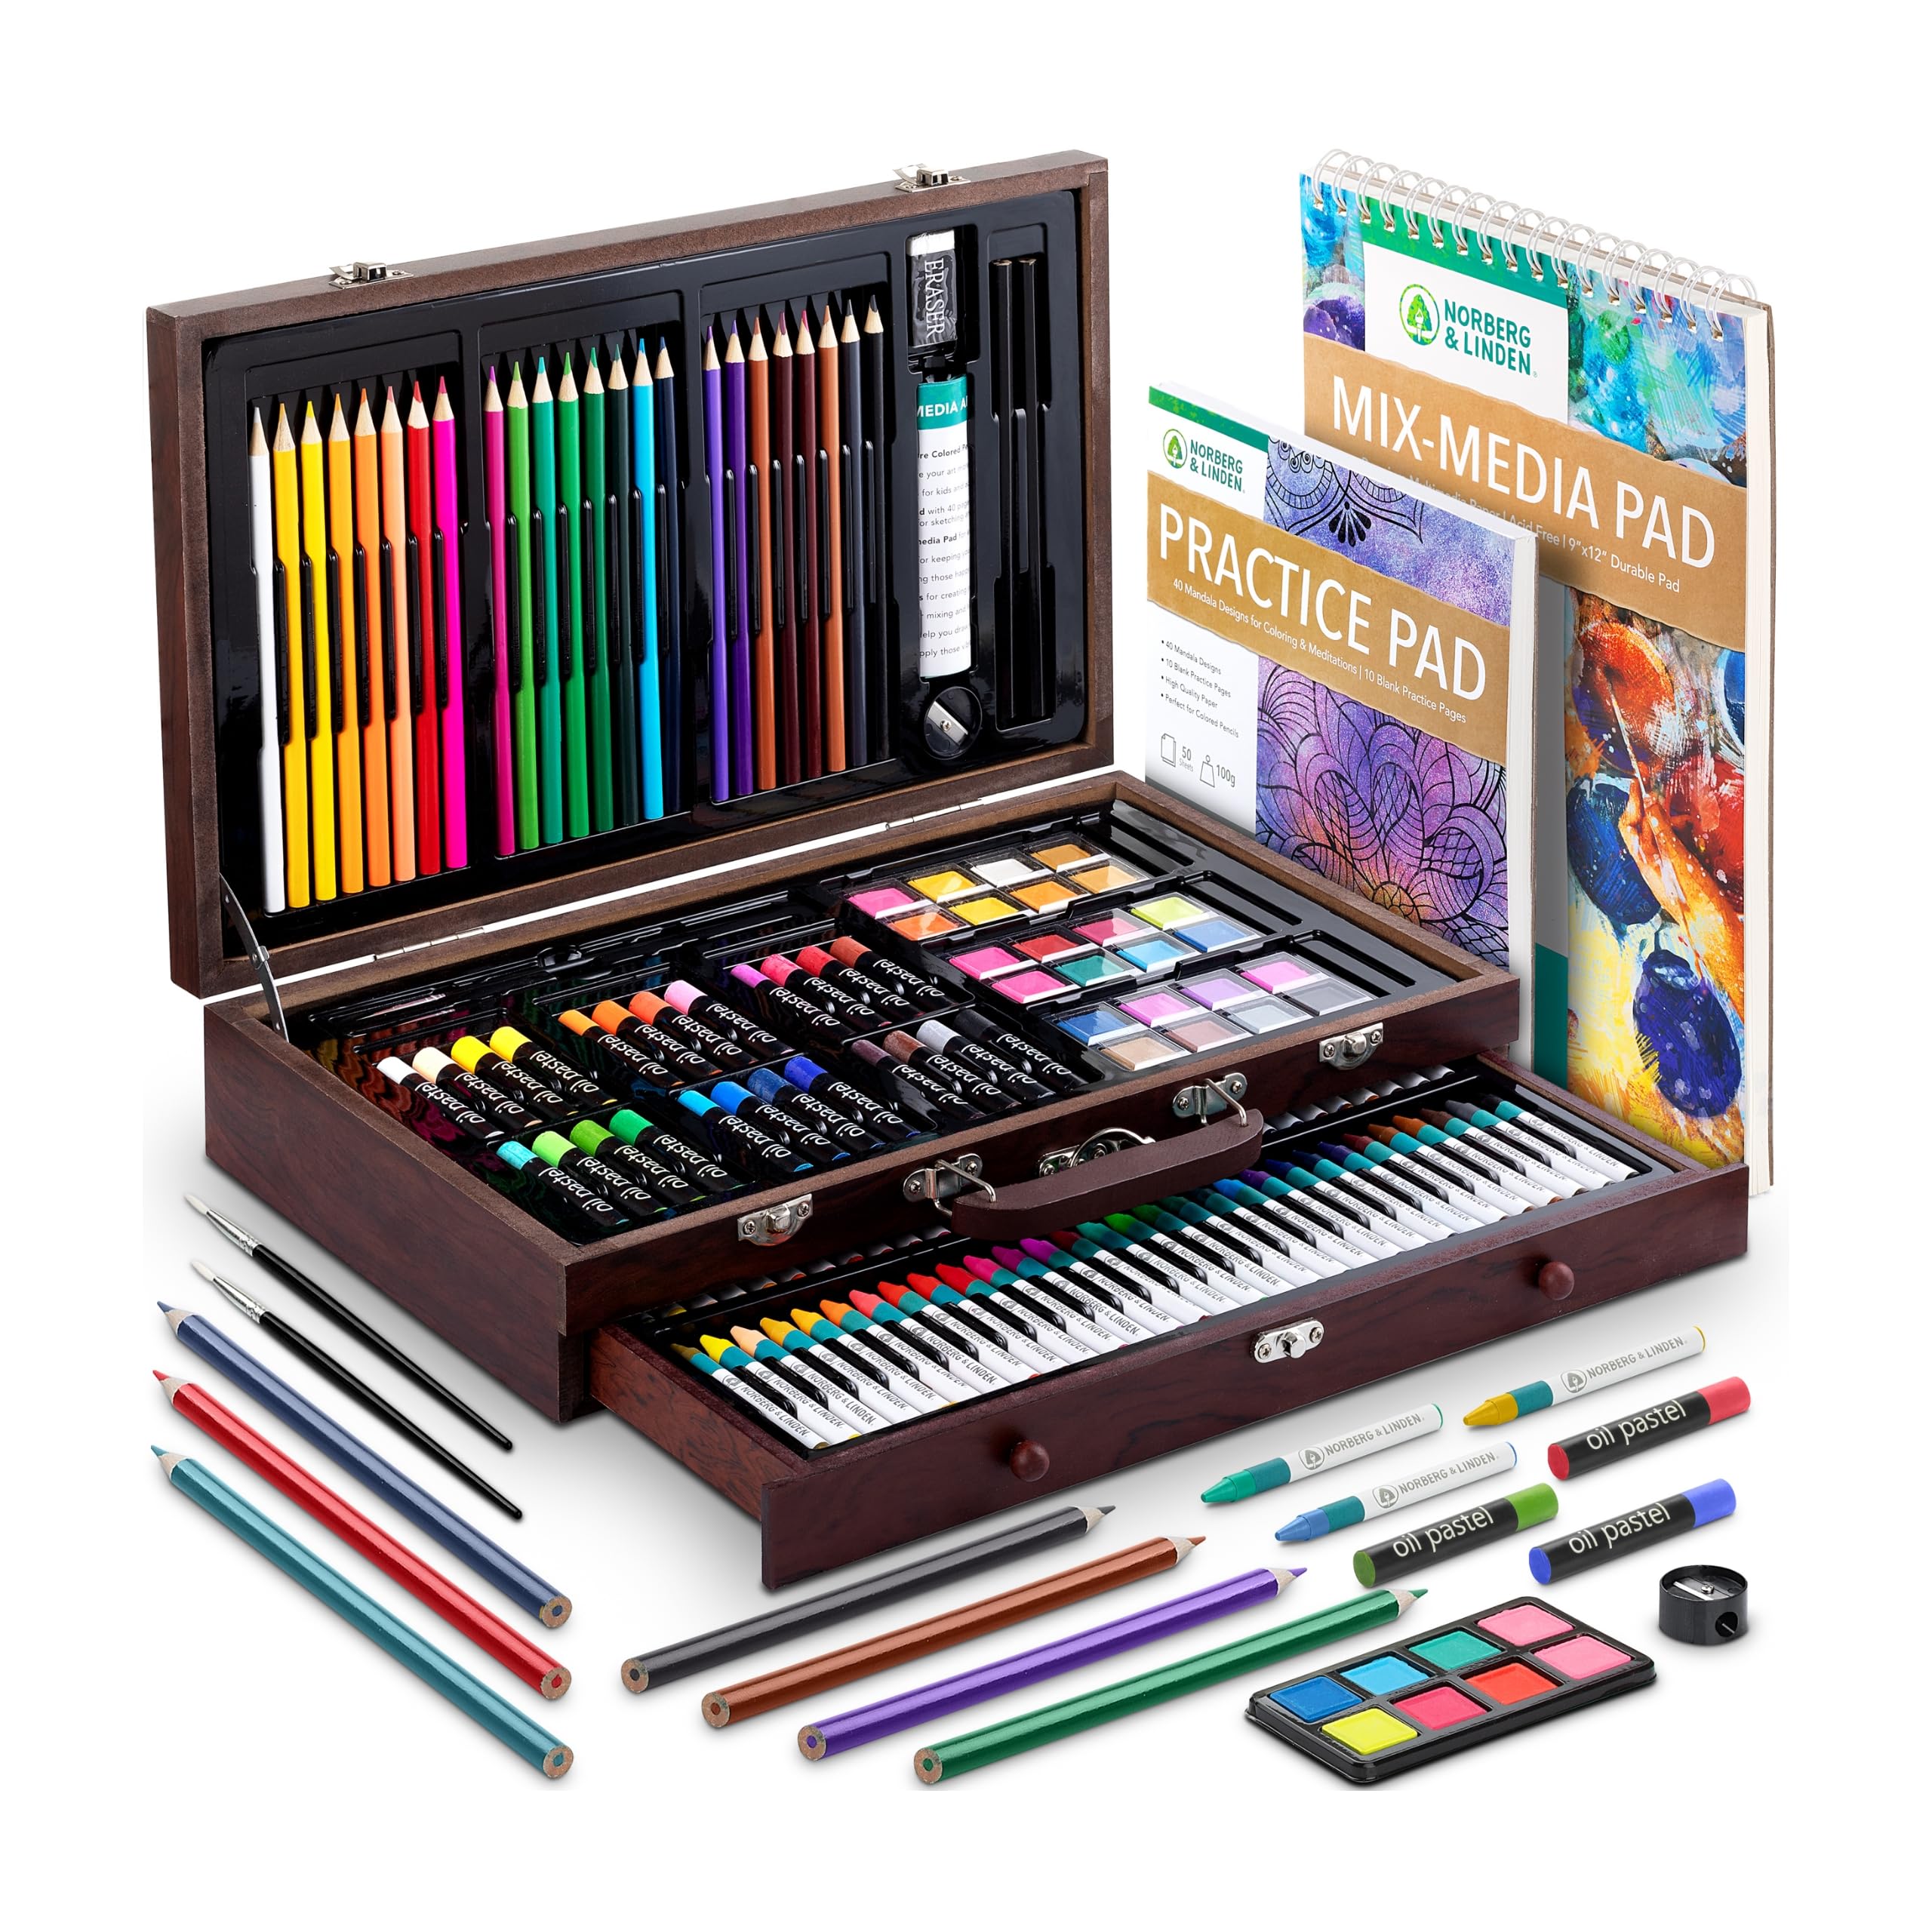 Norberg & Linden 144-Piece Art Set in Wooden Box with Drawer - Art Set for Adults, Teens, Kids - Premium Art Supplies - Includes Watercolors, Oil Pastels, Crayons, & More